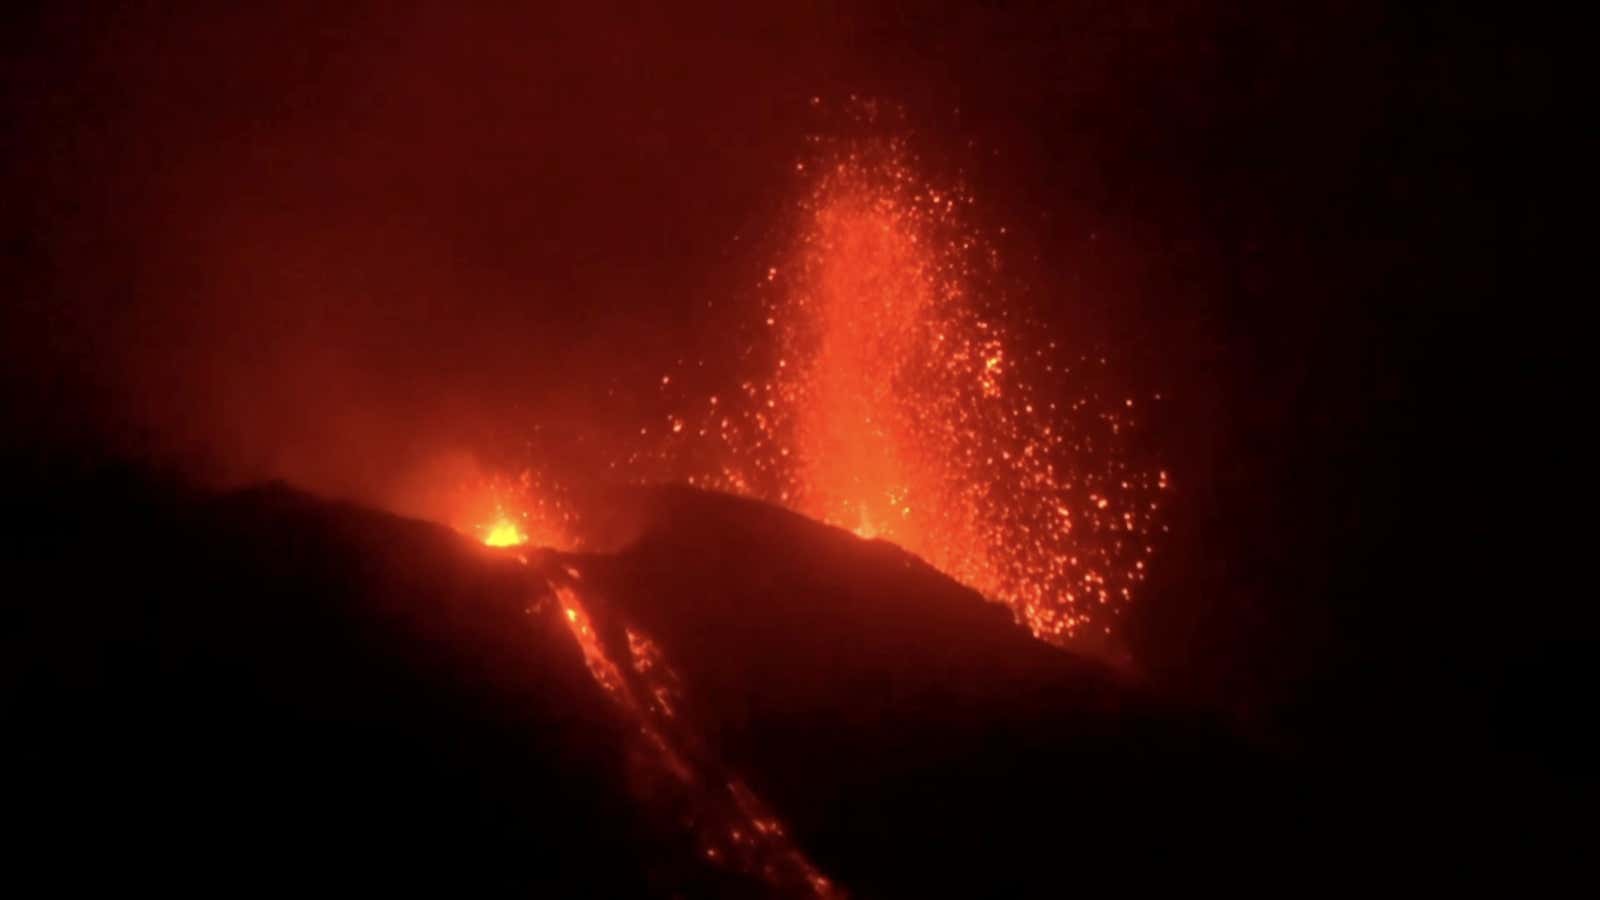 Lava erupts from the Stromboli volcano the evening after an explosion in Stromboli, Italy on Aug. 28.